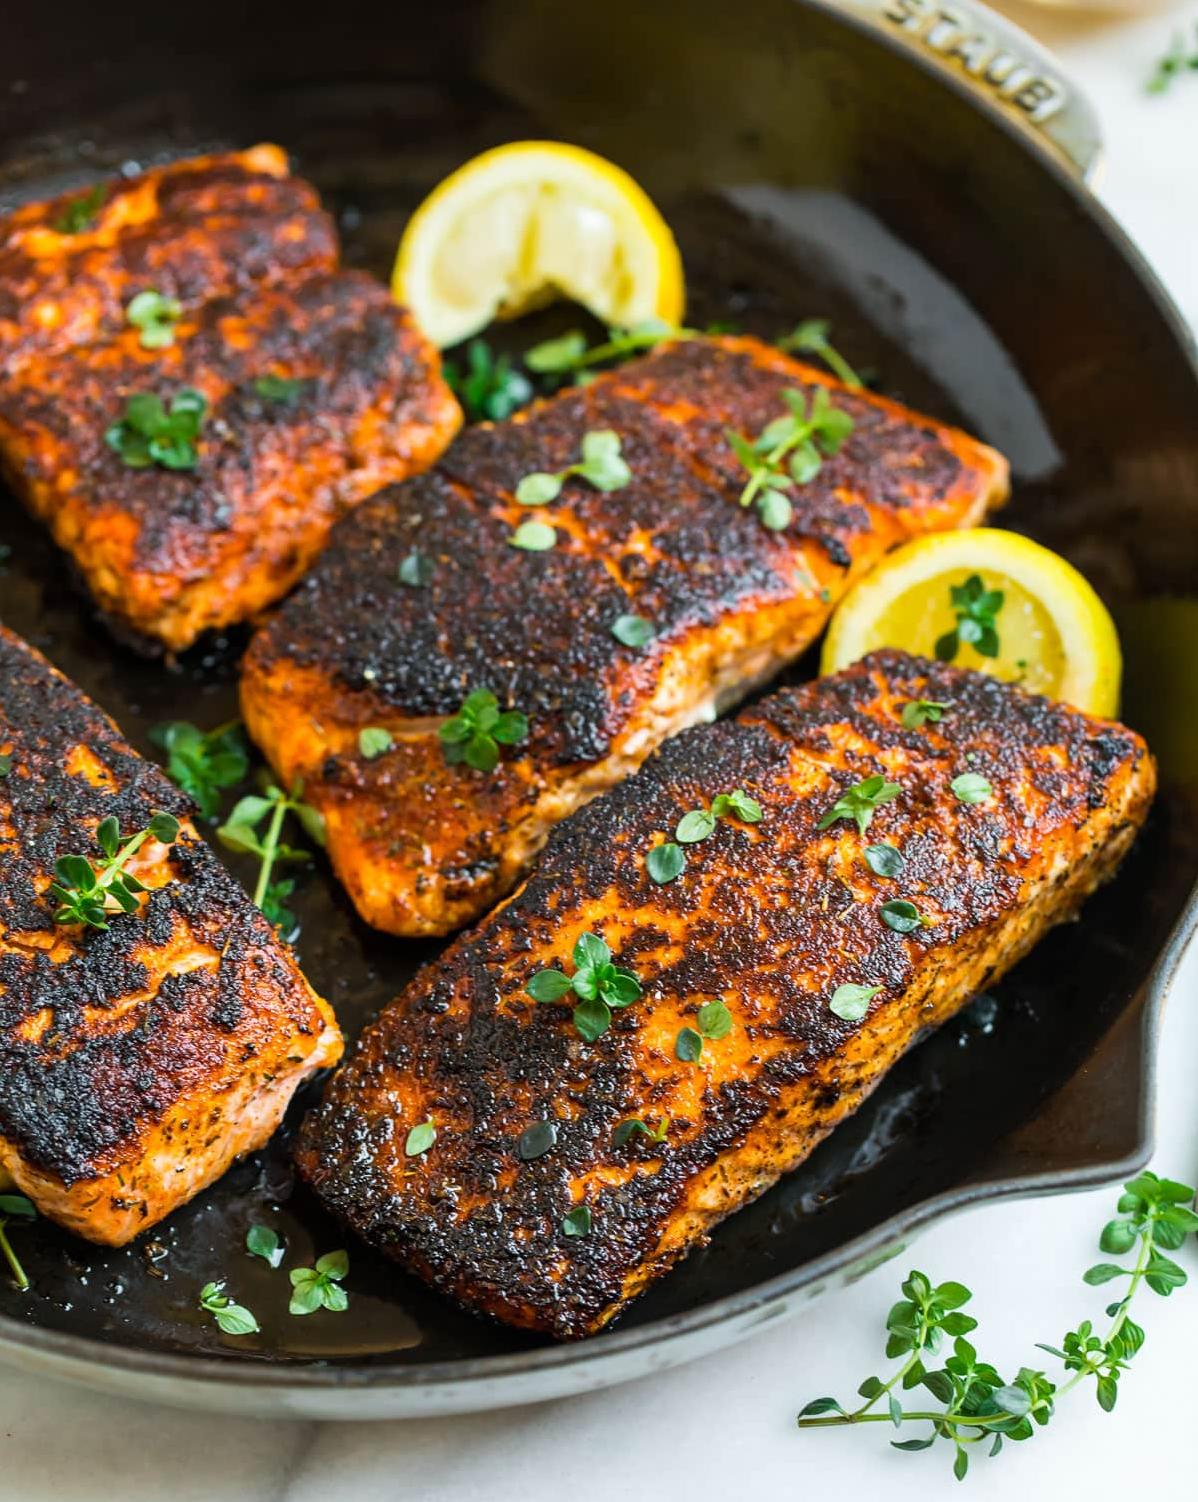  Who needs a seafood restaurant when you can make this amazing grilled salmon at home?